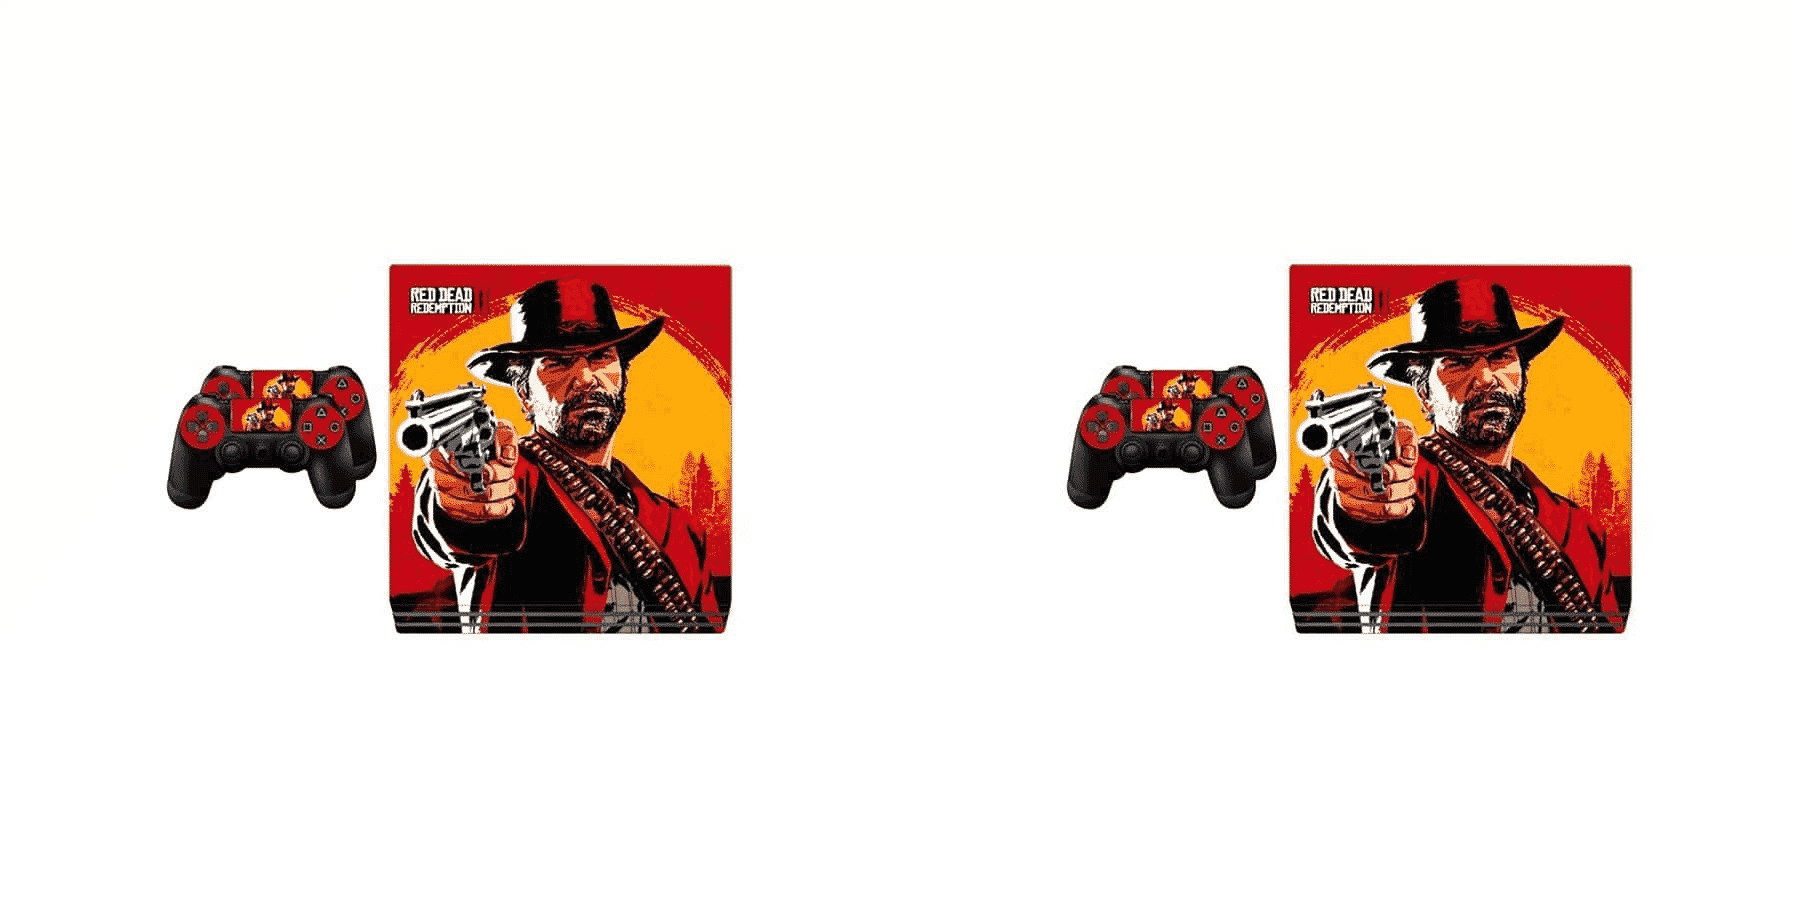 Set of 2 Red Dead Redemption II Printed Stickers for PlayStation 4 and Controllers - 4 Piece